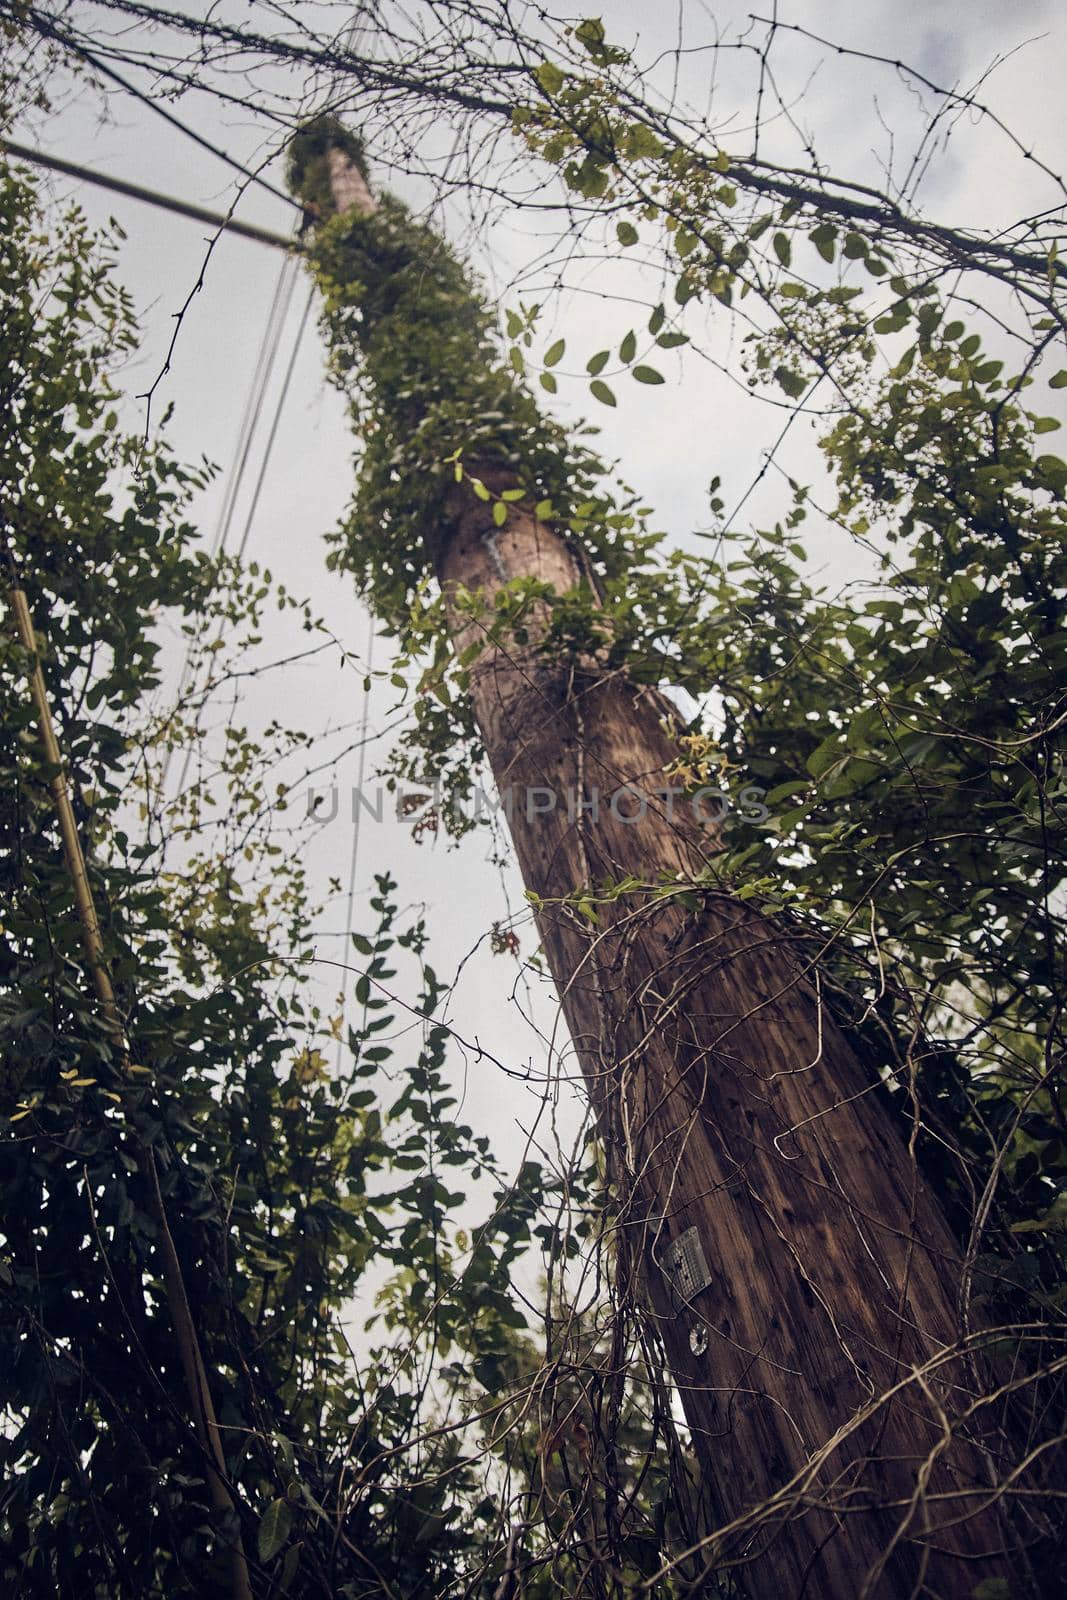 Looking up at telephone pole for communications covered in vines by njproductions